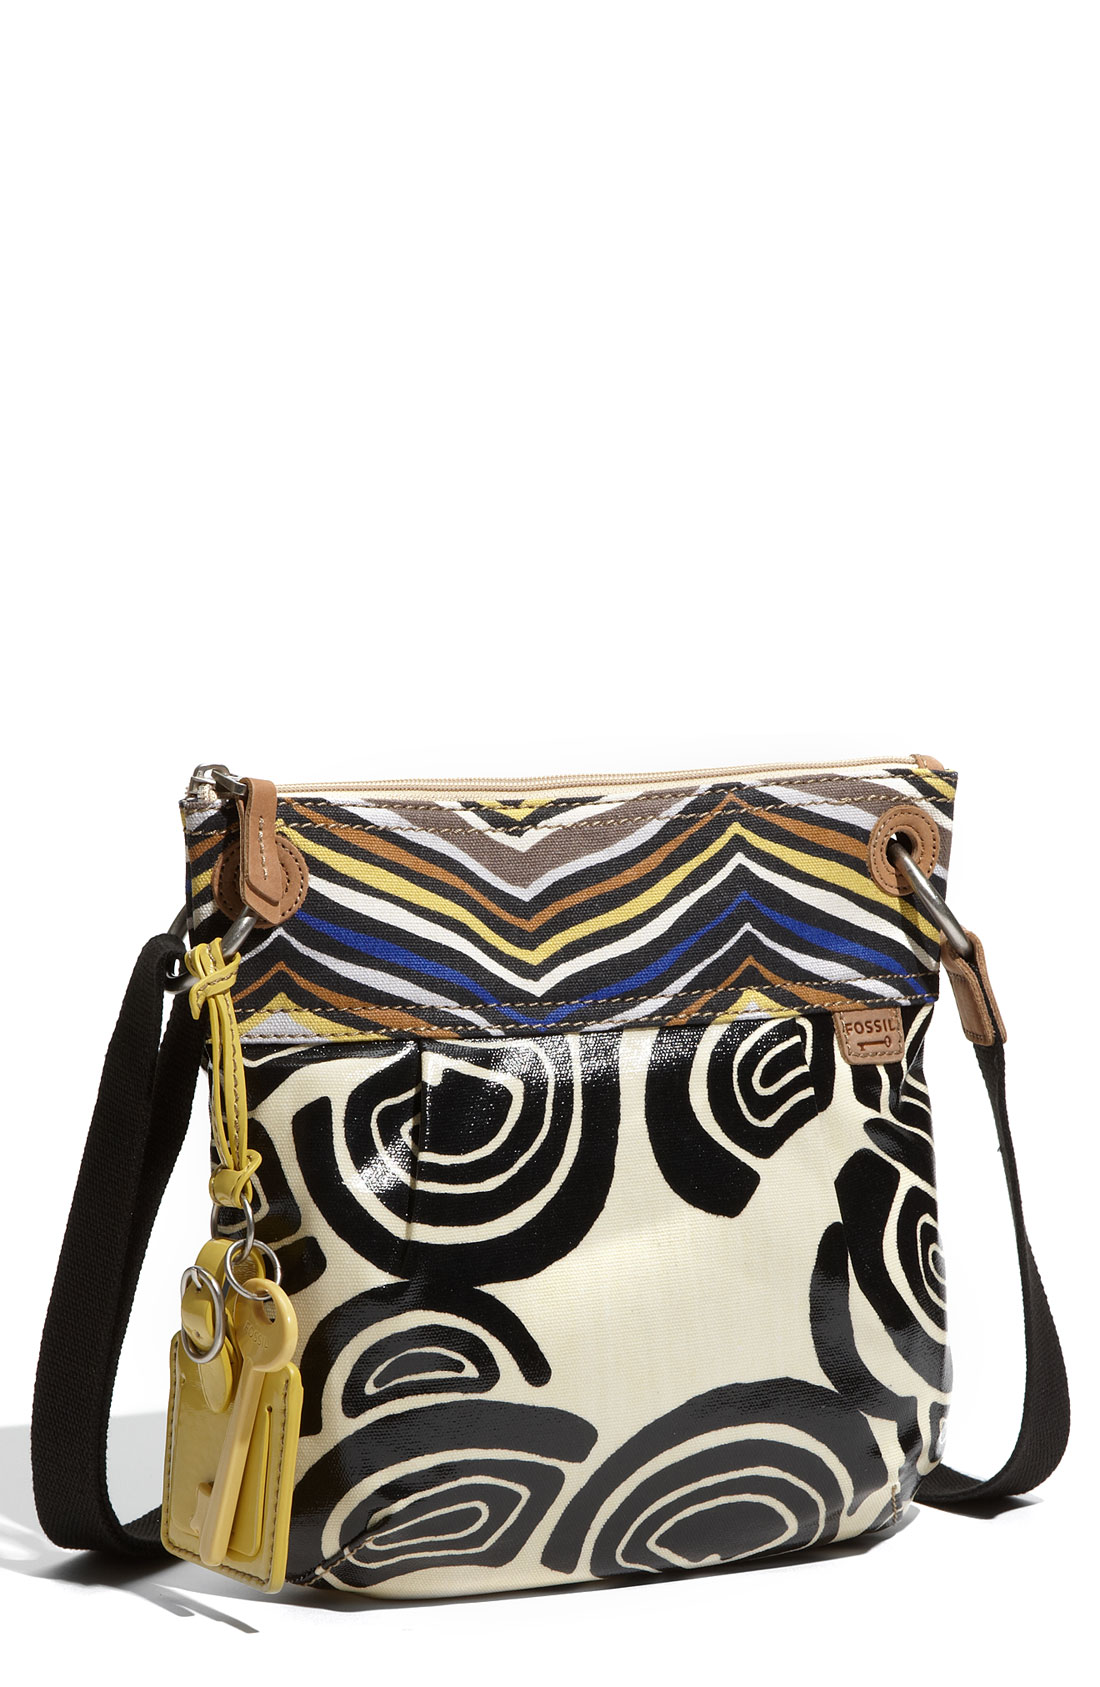 Fossil Key-per Printed Coated Canvas Crossbody Bag in (white/ black) | Lyst